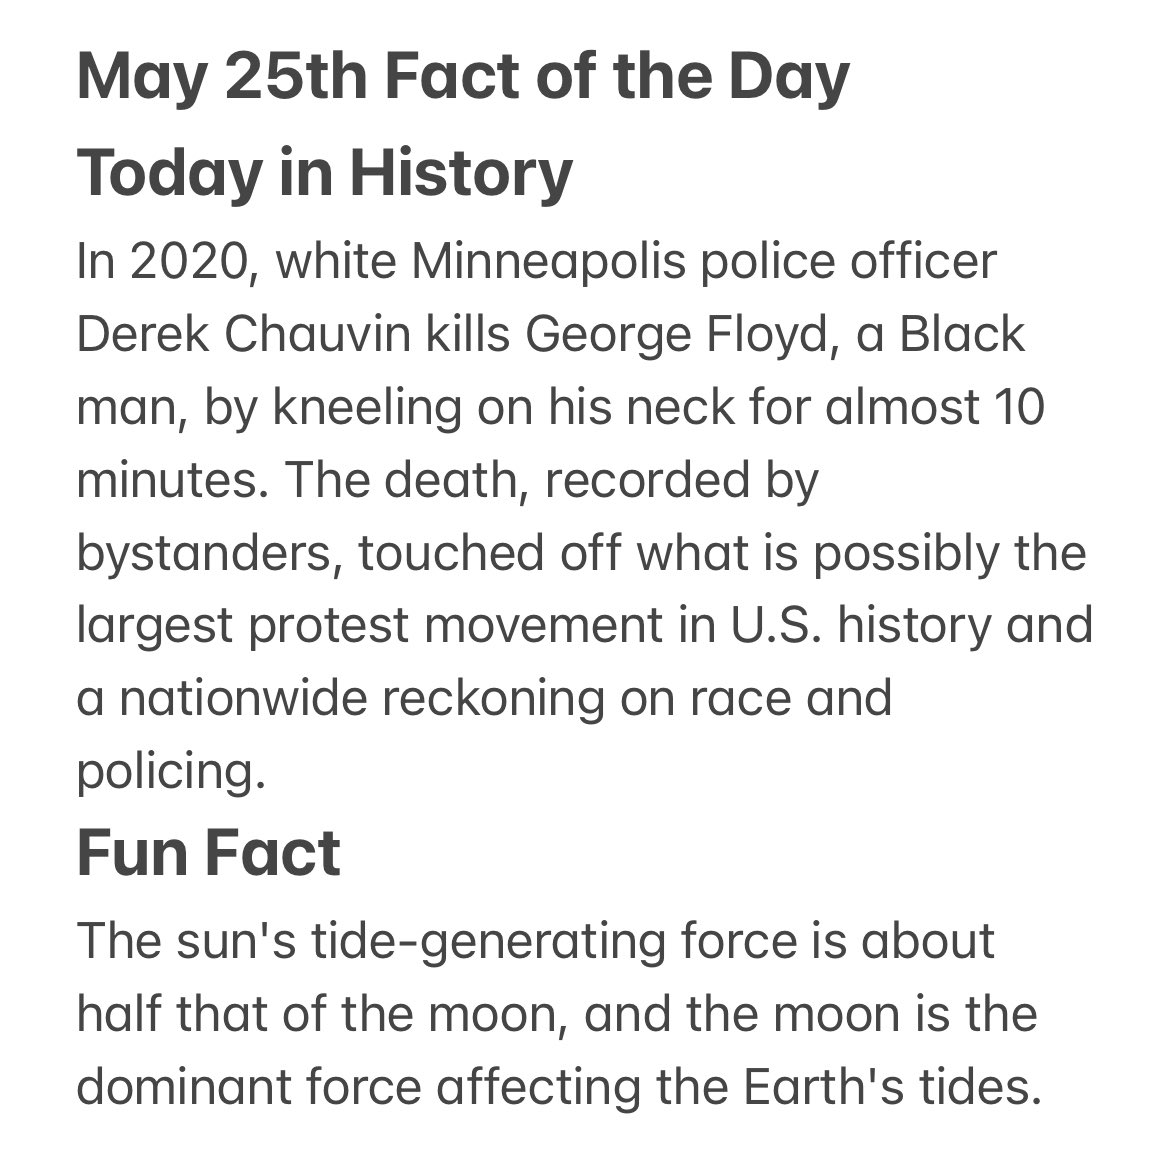 Fact of the Day for May 25th #factoftheday